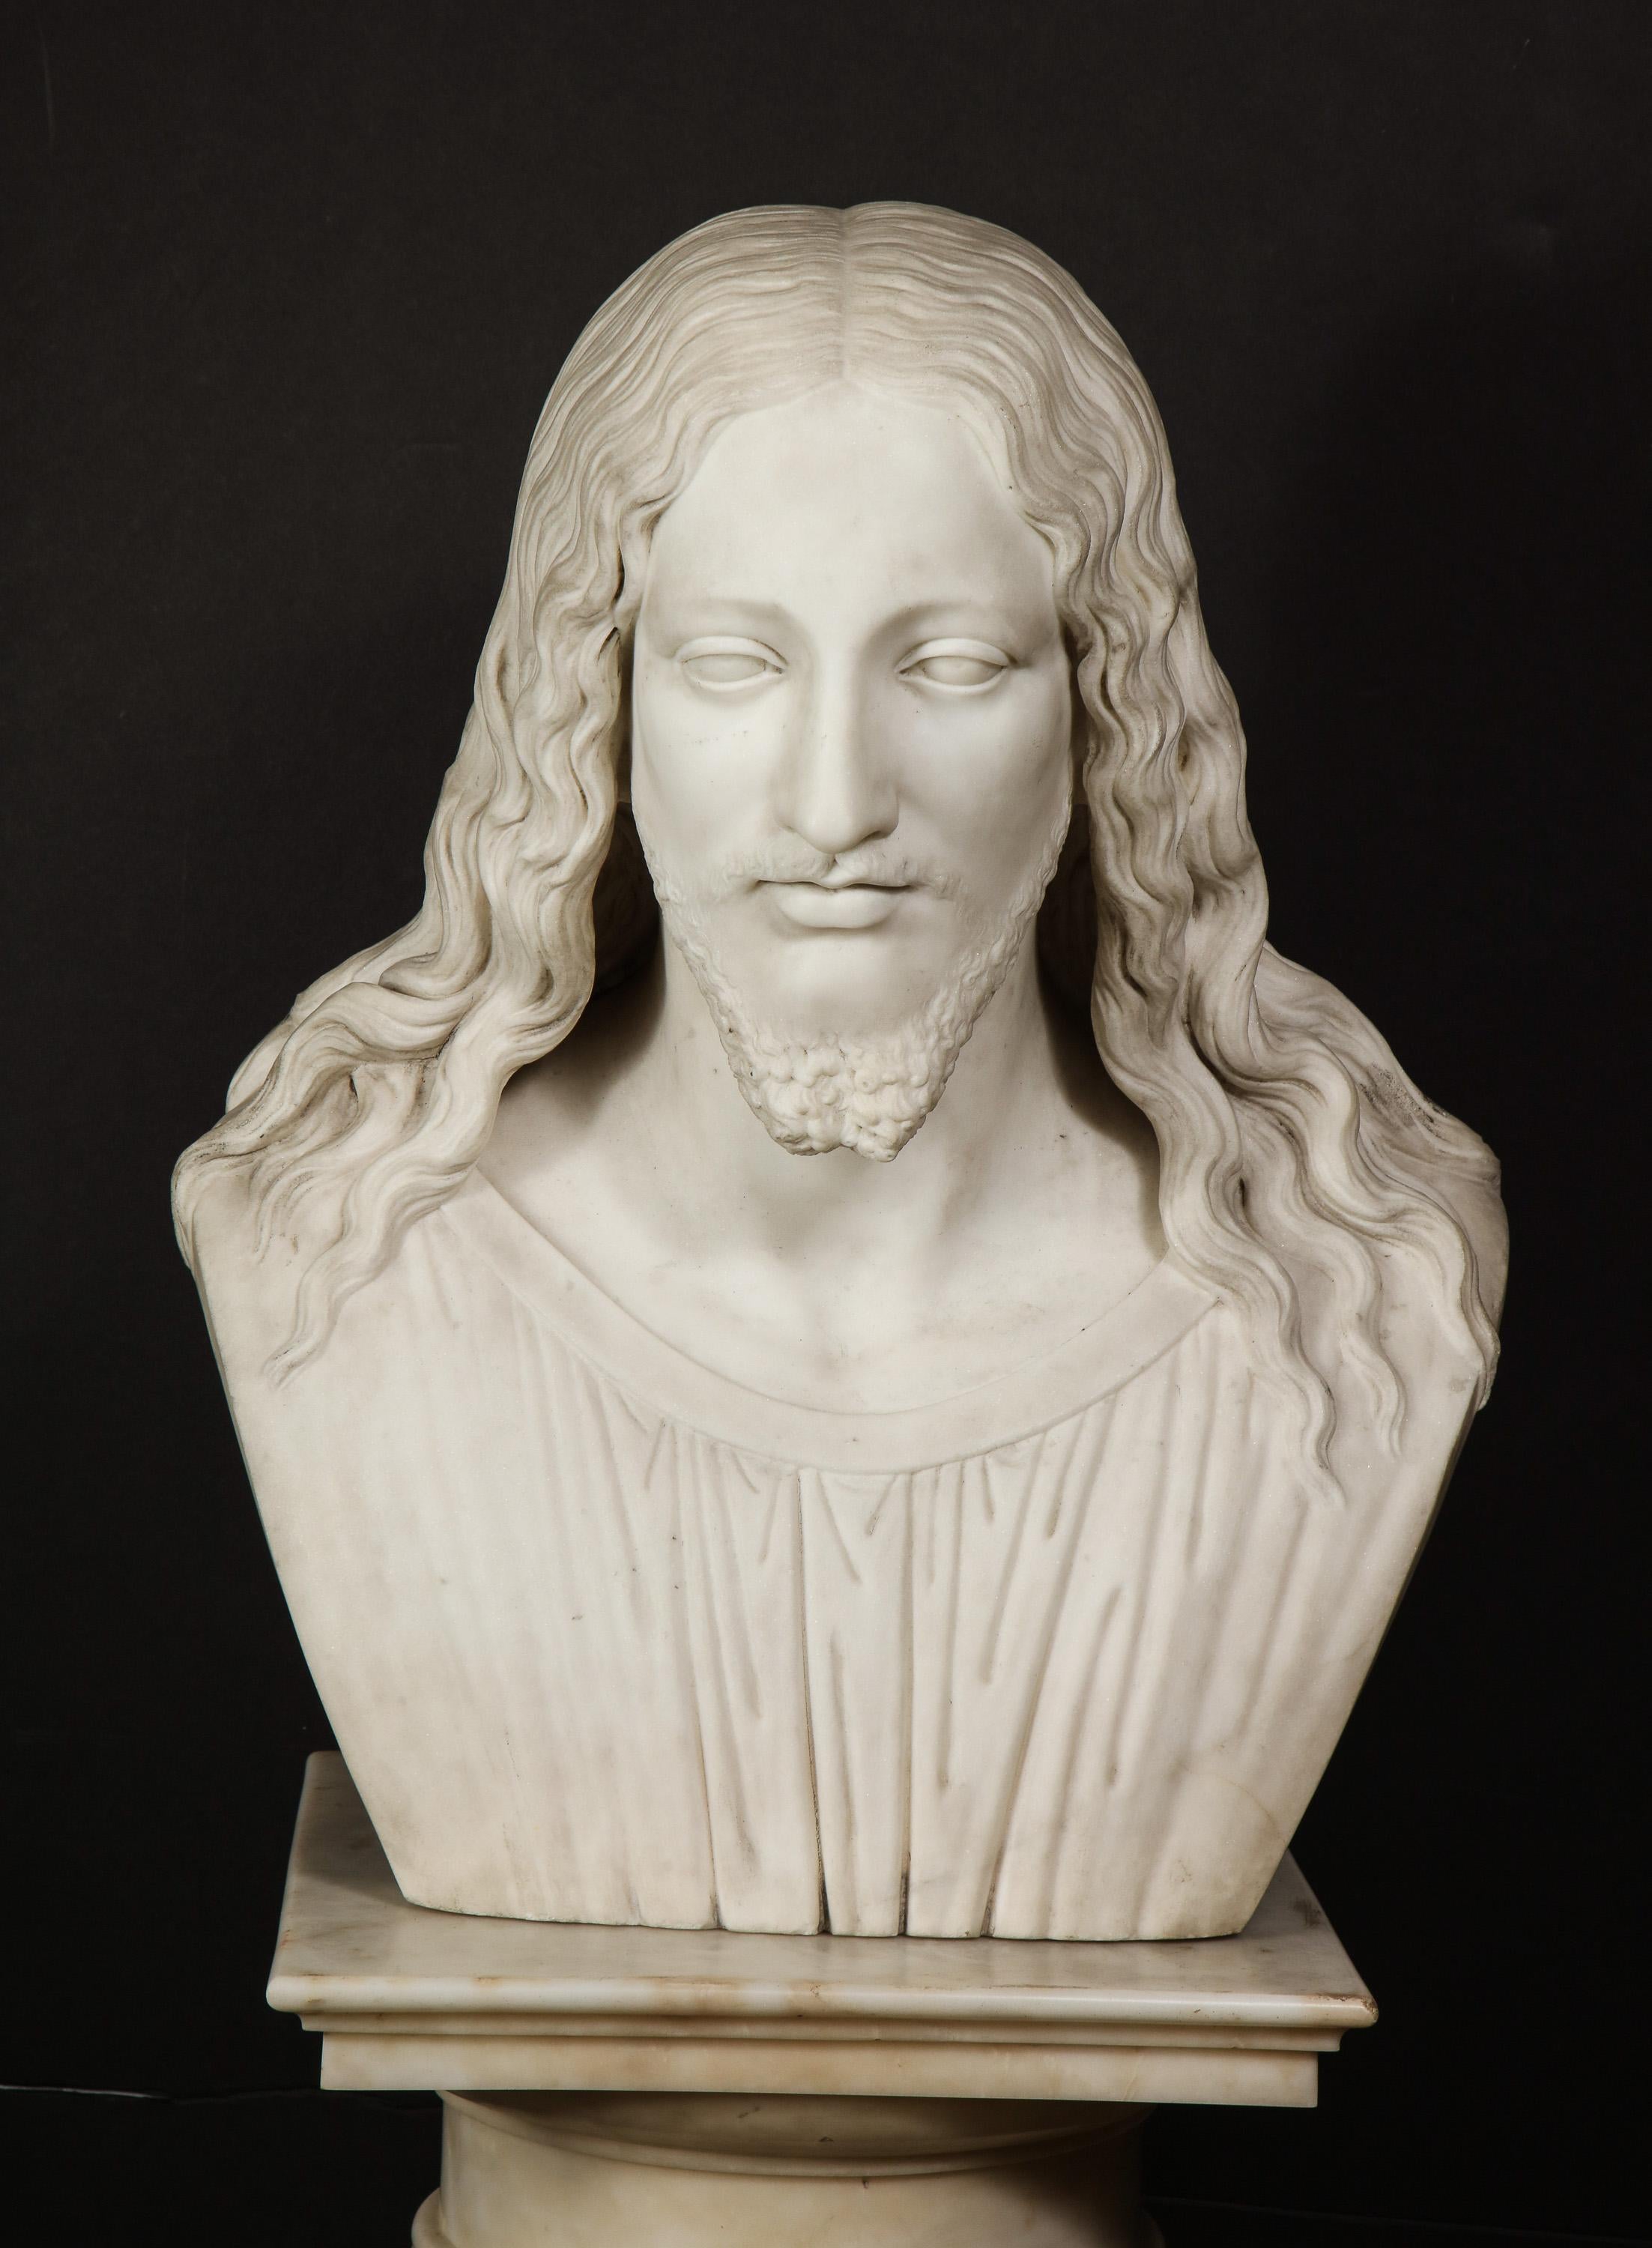 An exceptional carved Italian white marble bust of Jesus Christ, circa 1860

Of extremely high quality, comes with white marble pedestal.

Fantastic details like the anatomy, face, beard, eyes, hair and perfect stillness.

A true masterpiece!